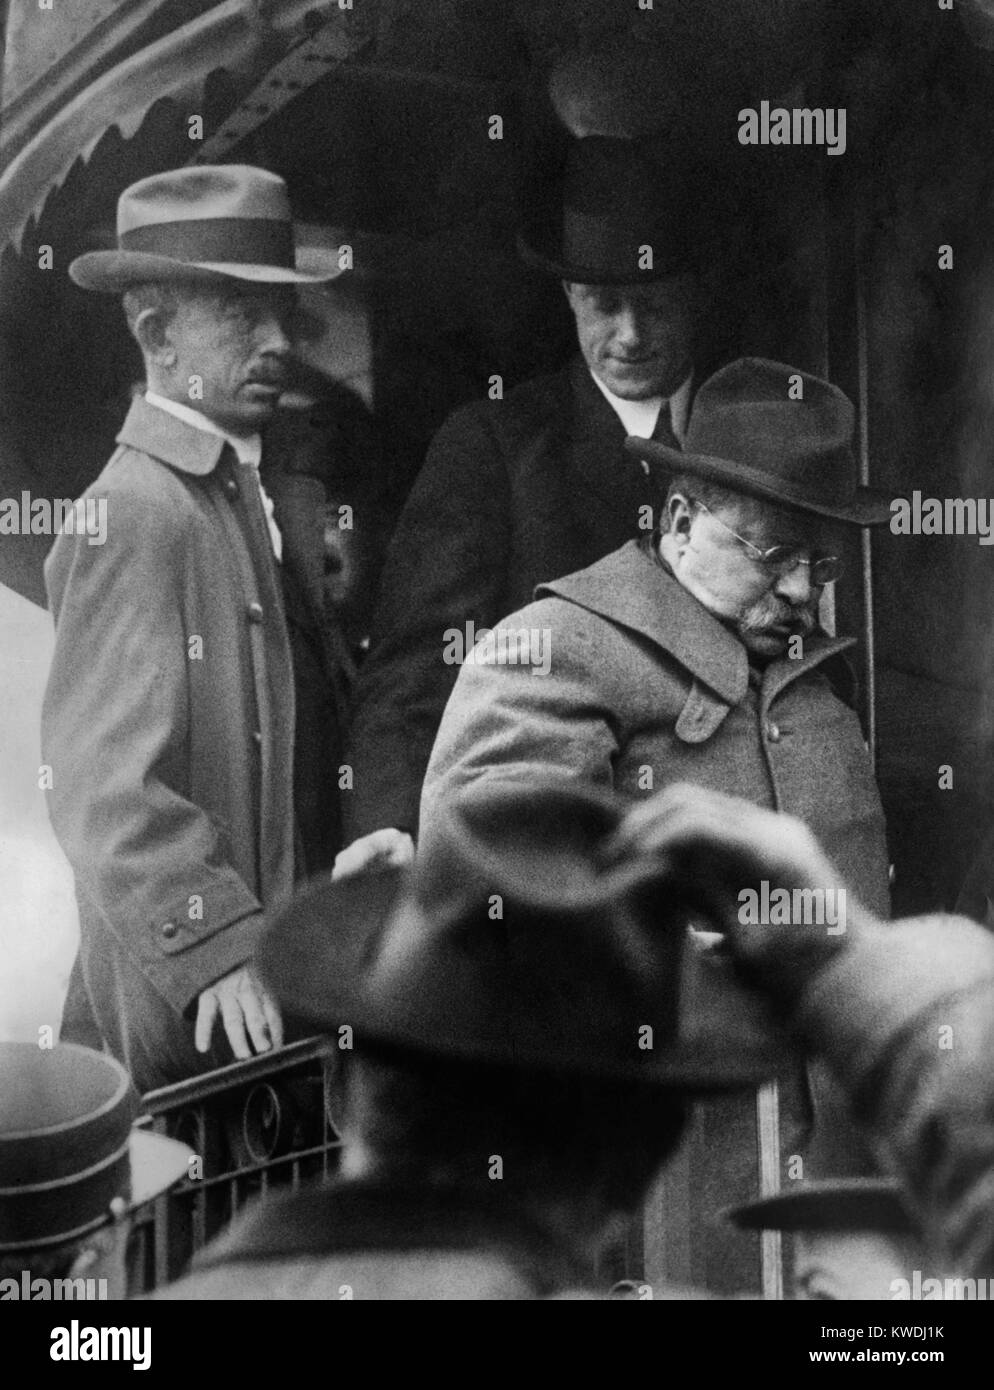 Theodore Roosevelt arrives home on Oct. 22, 1912, after being shot in Milwaukee 6 days earlier. He was sidelined for another week, until his mass meeting at Madison Square Garden on Oct. 30th, five days before the election (BSLOC 2017 8 54) Stock Photo